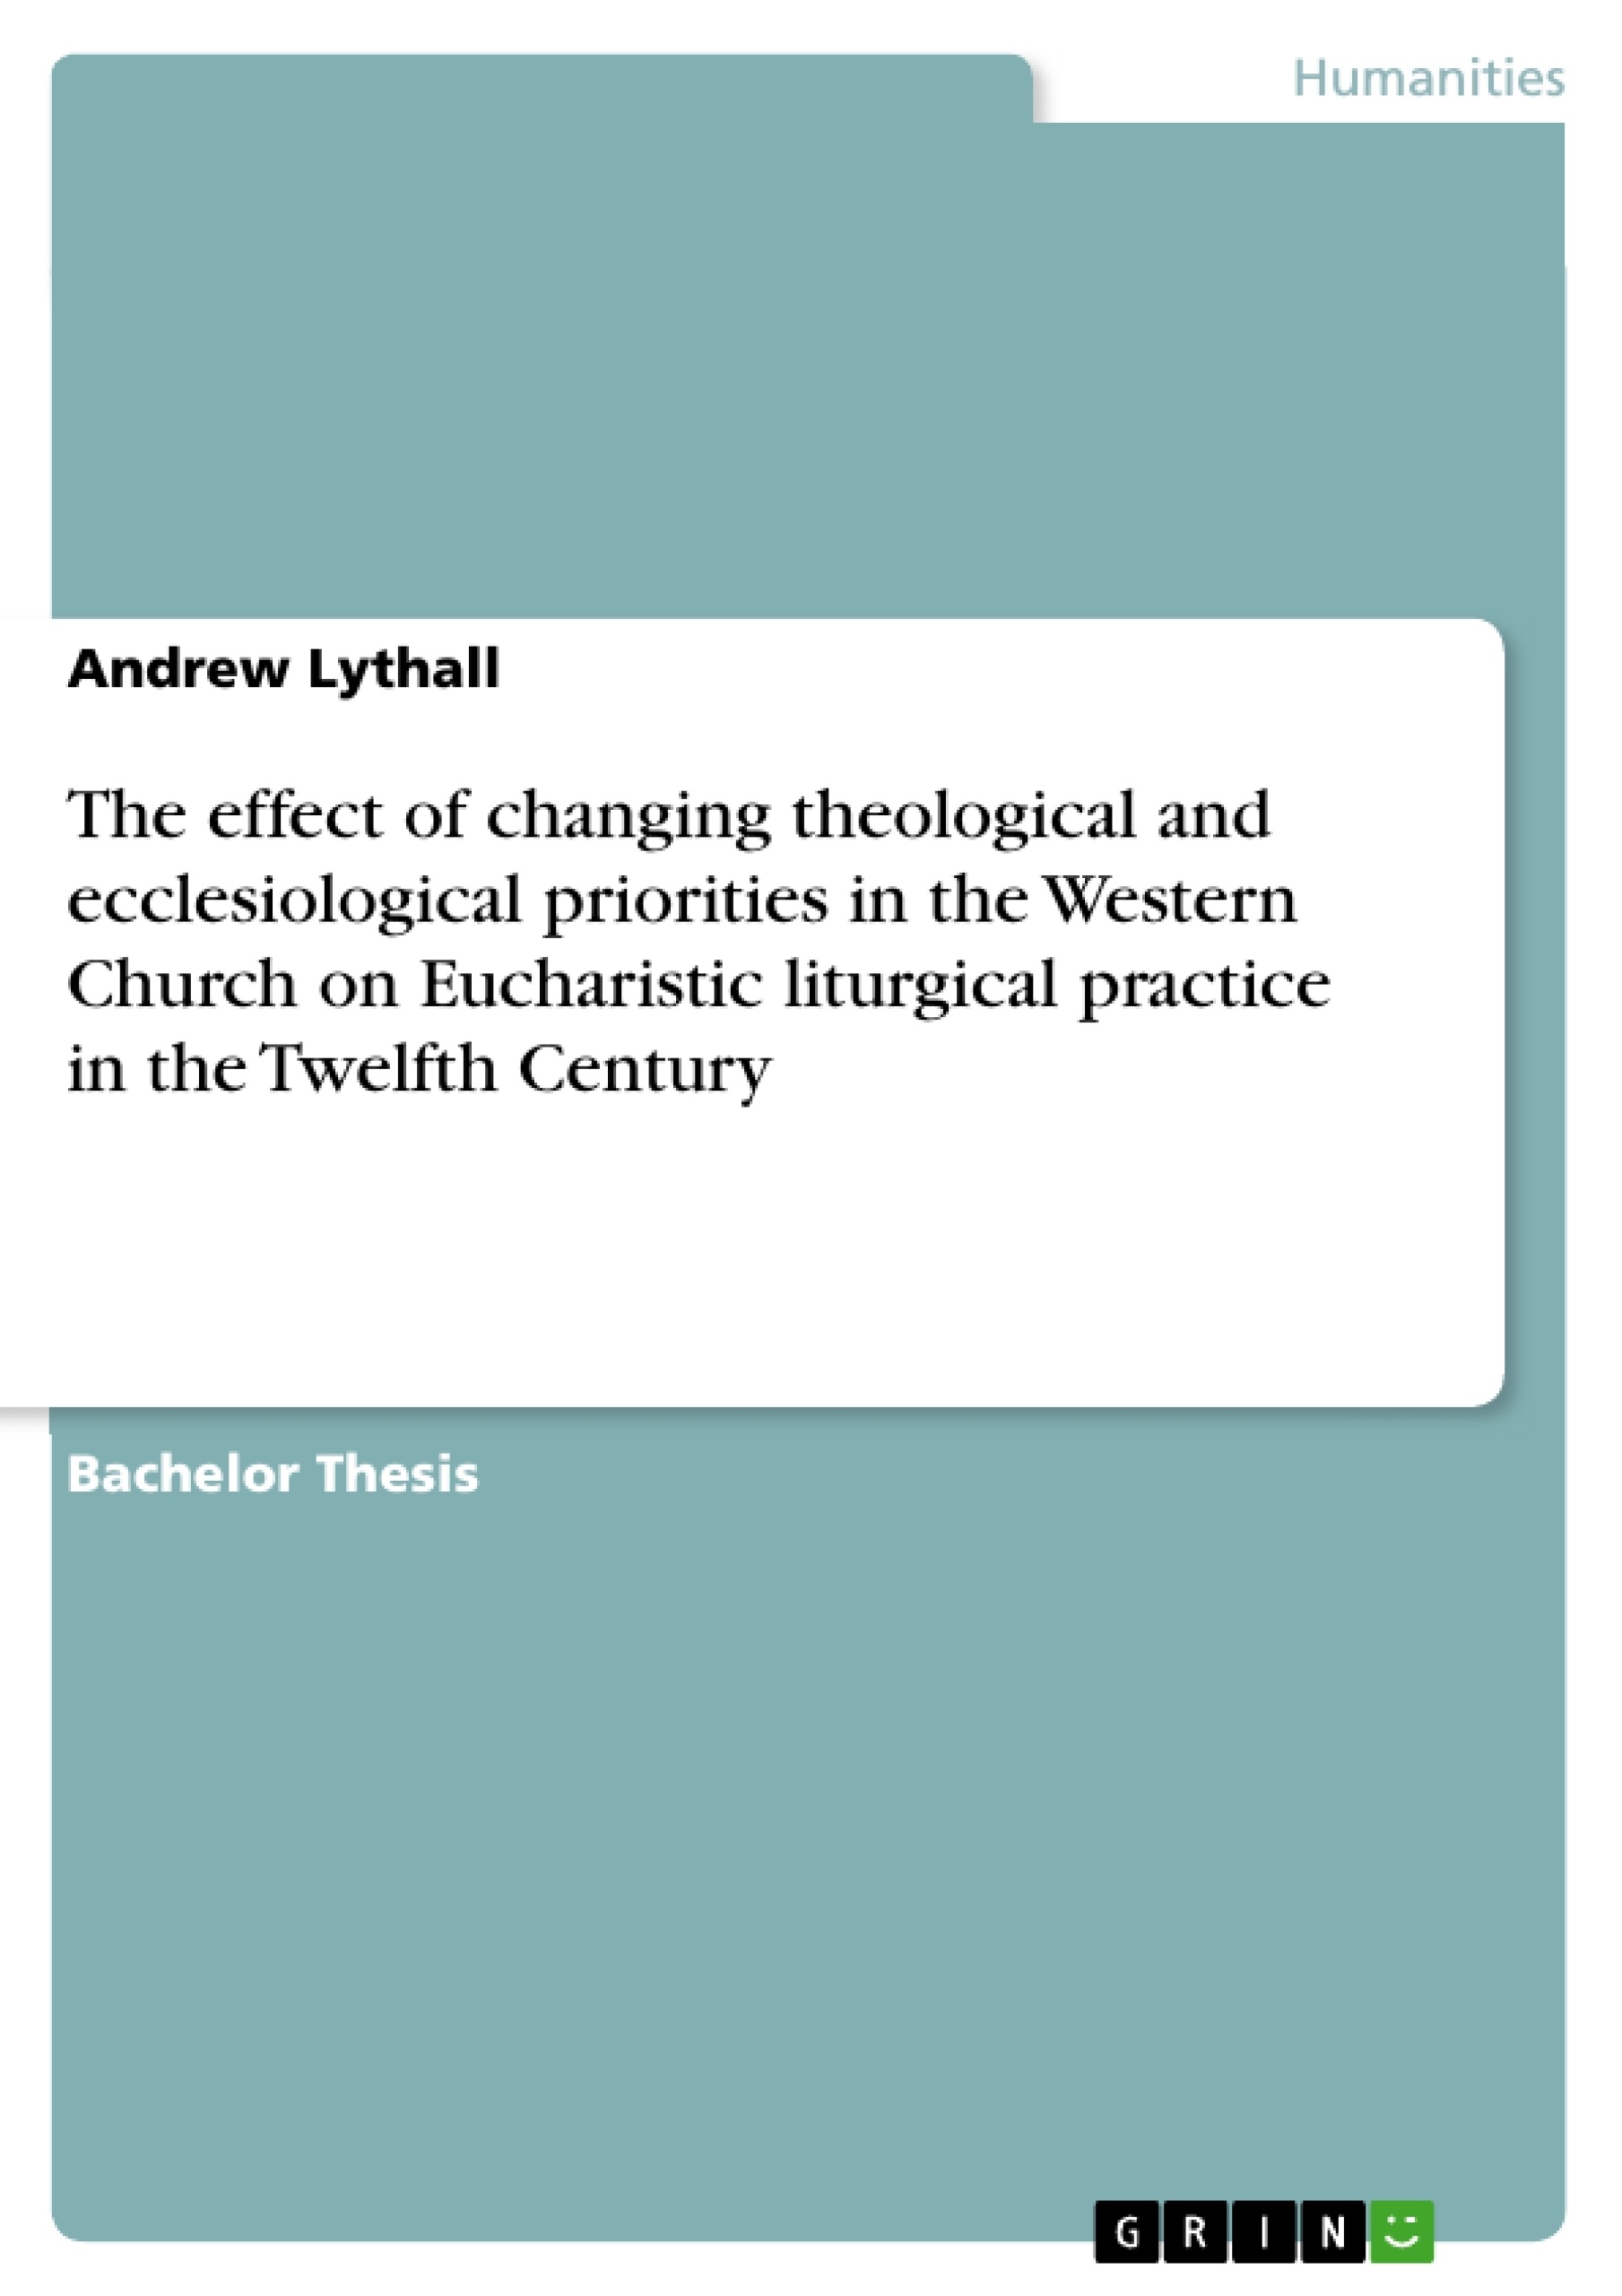 Título: The effect of changing theological and ecclesiological priorities in the Western Church on Eucharistic liturgical practice in the Twelfth Century